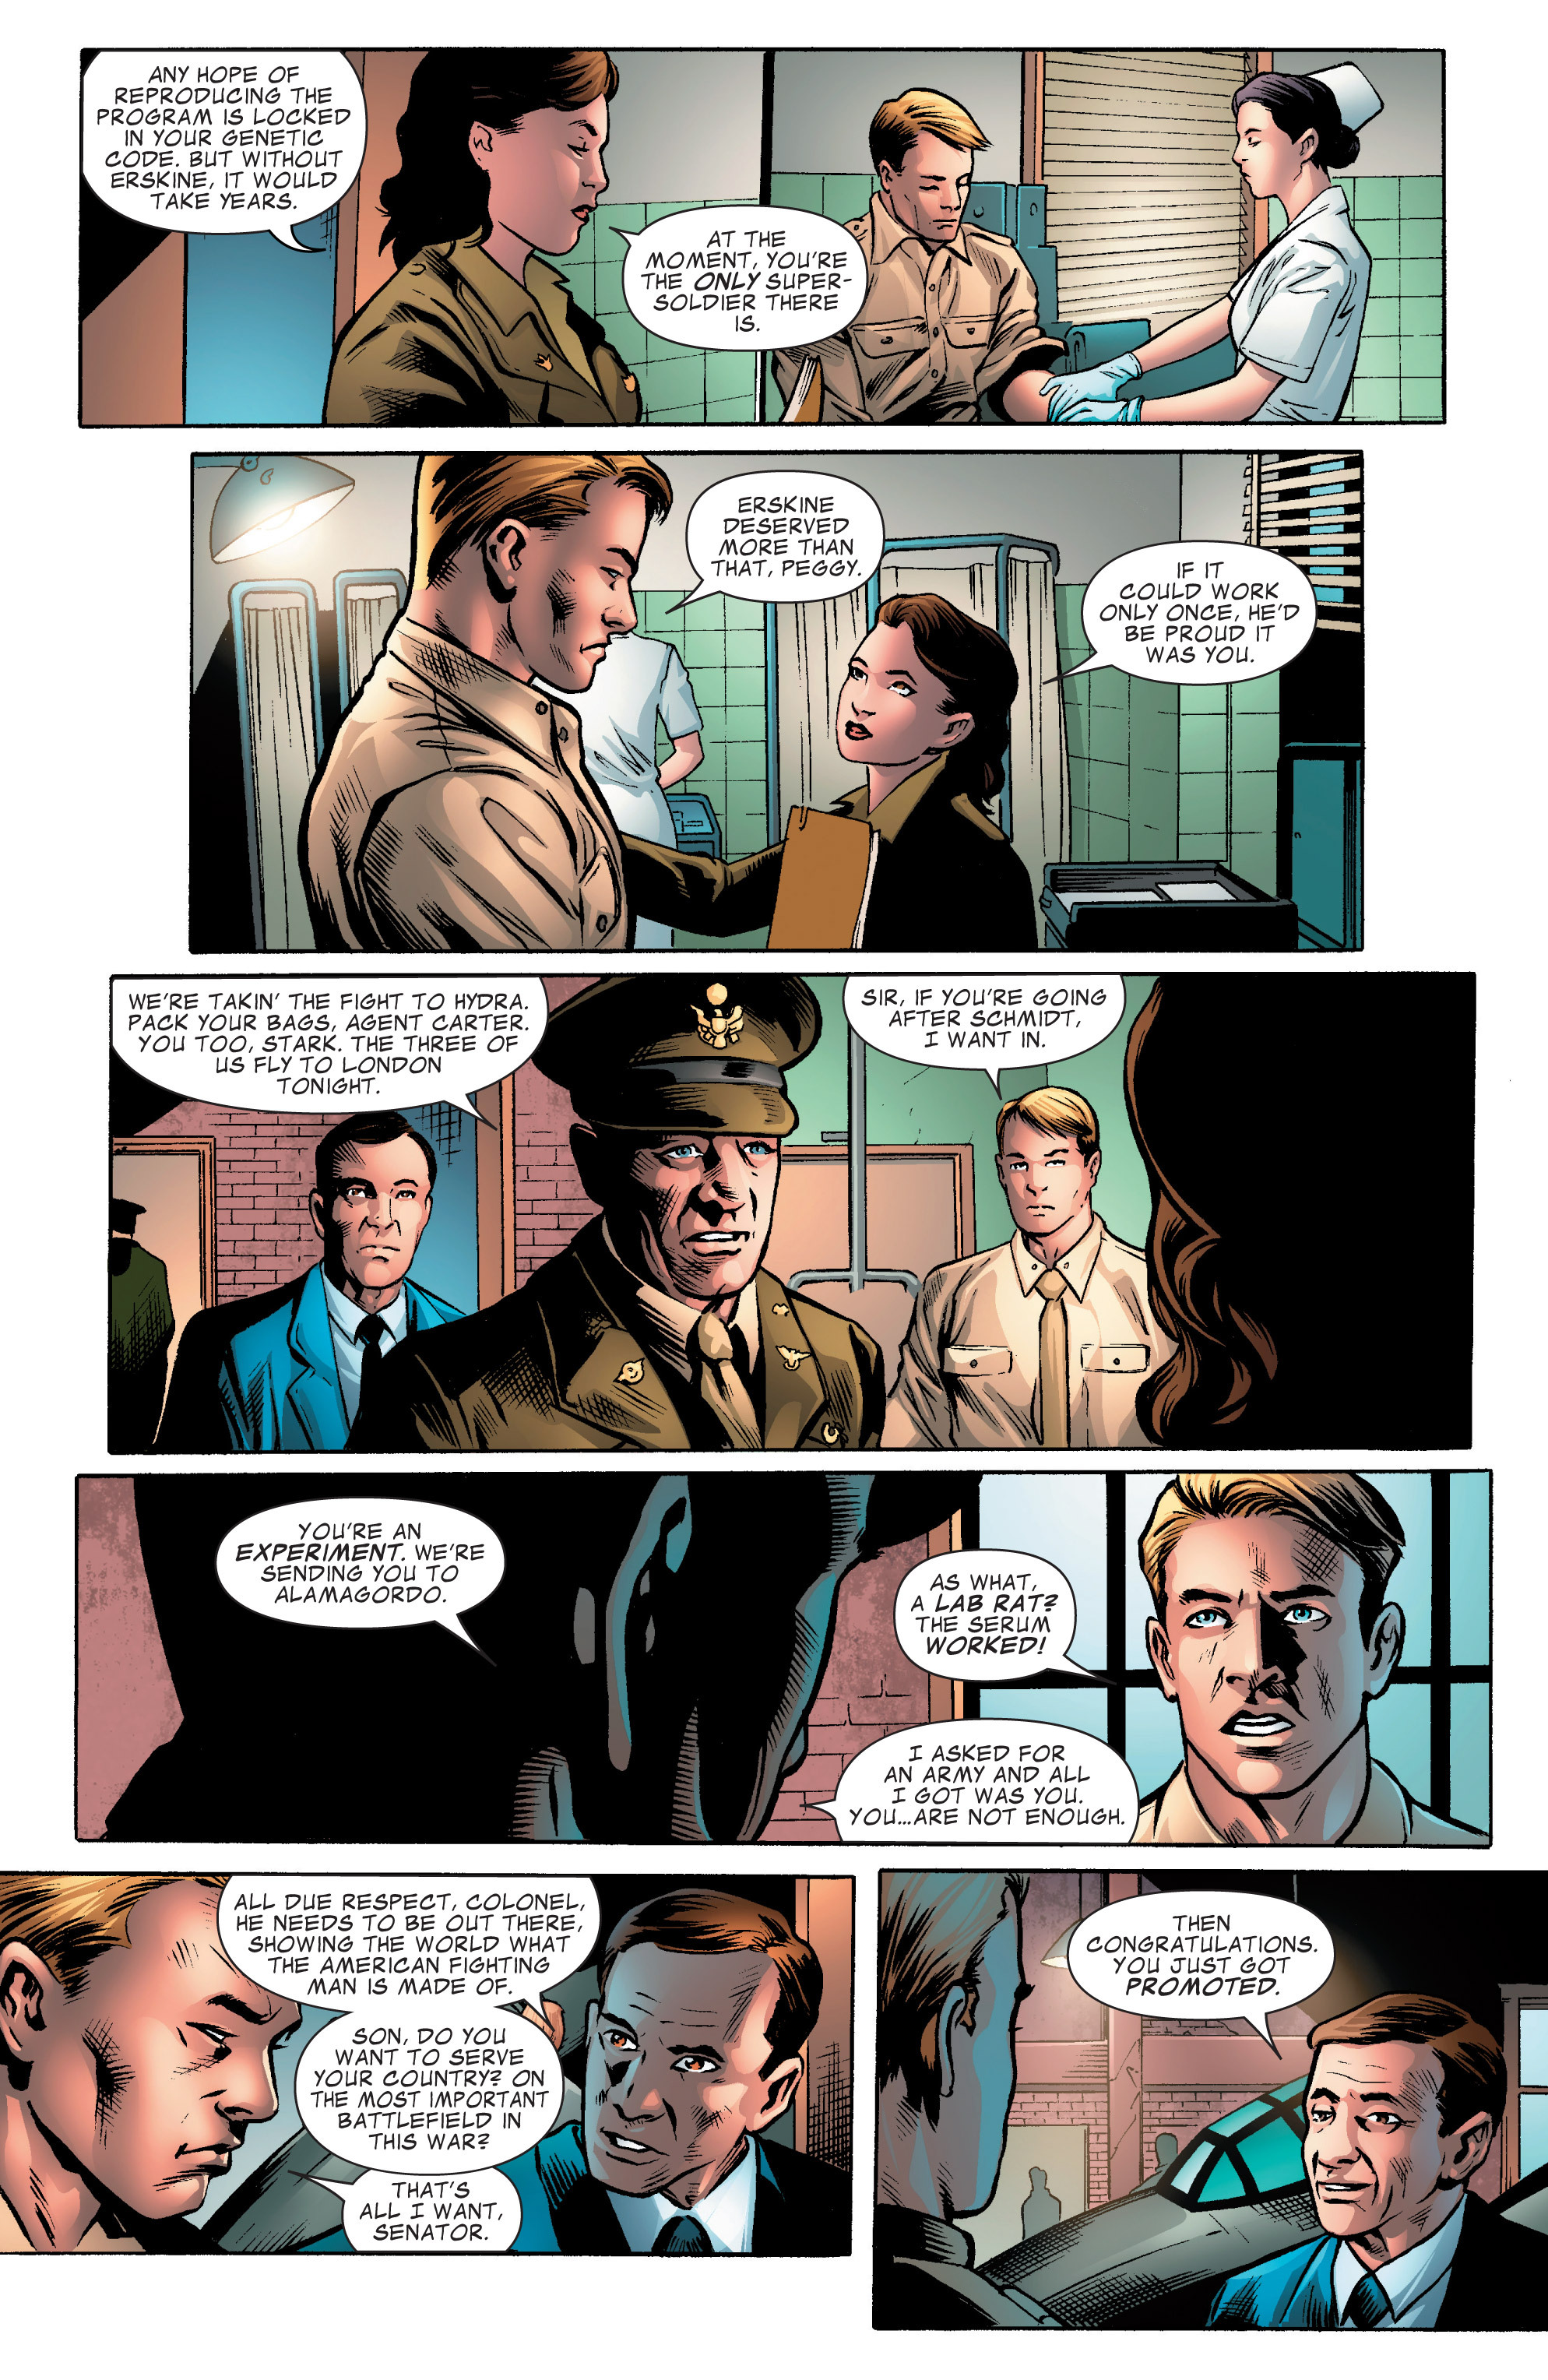 Captain America: The First Avenger Adaptation 1 Page 9